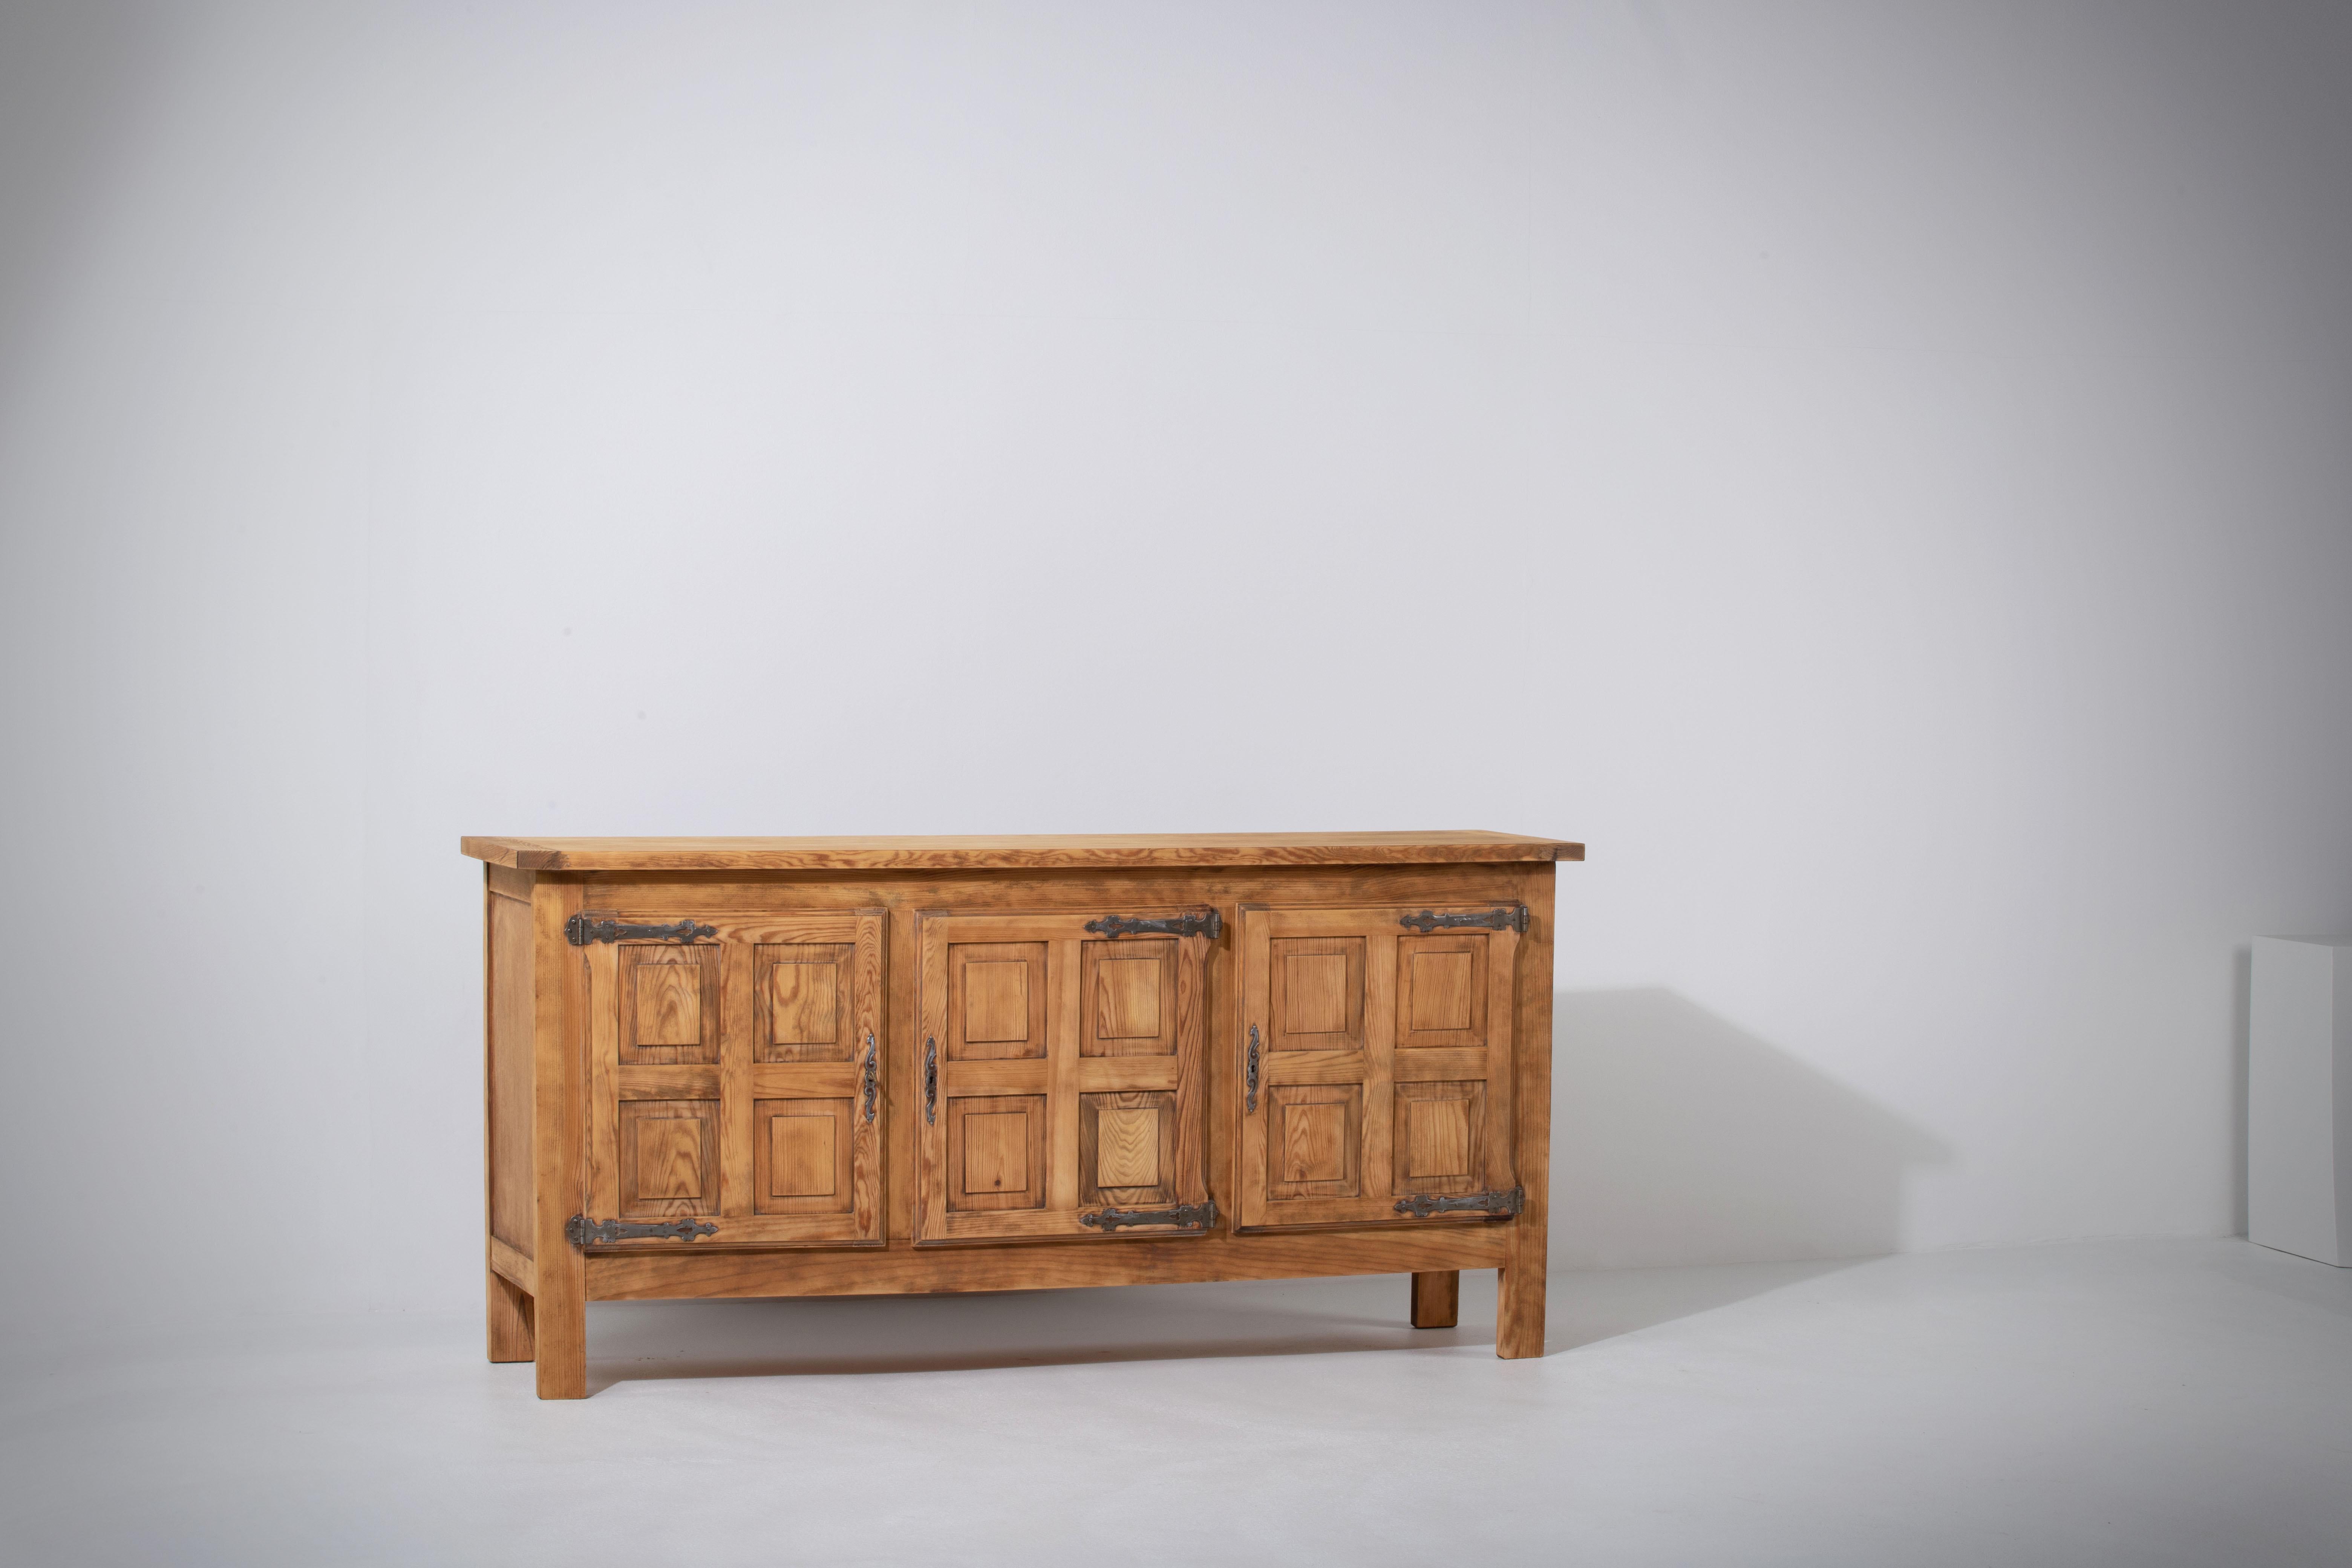 Presenting an impressive solid pine chalet sideboard, hailing from France in the 1950s. This substantial piece is a testament to traditional alpine cabin furniture, featuring a design characterized by straight lines and rustic simplicity.

Crafted